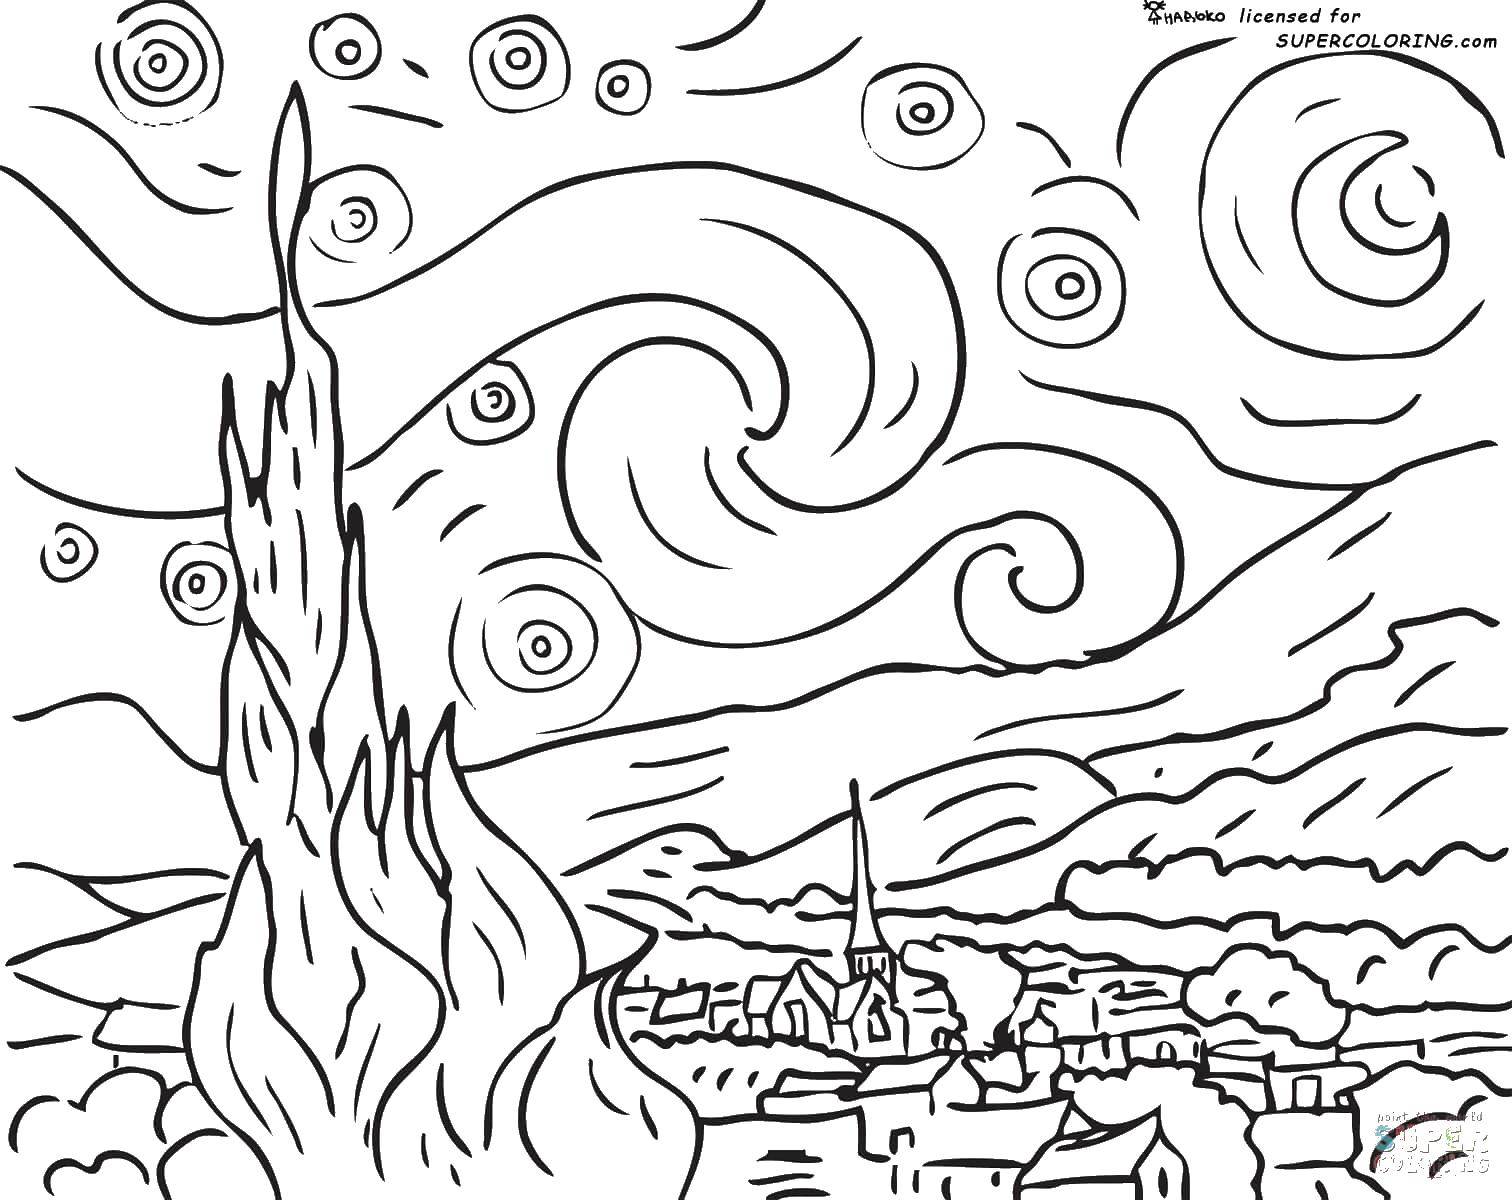 Coloring Starry night. Category coloring. Tags:  starry night painting van Gogh.